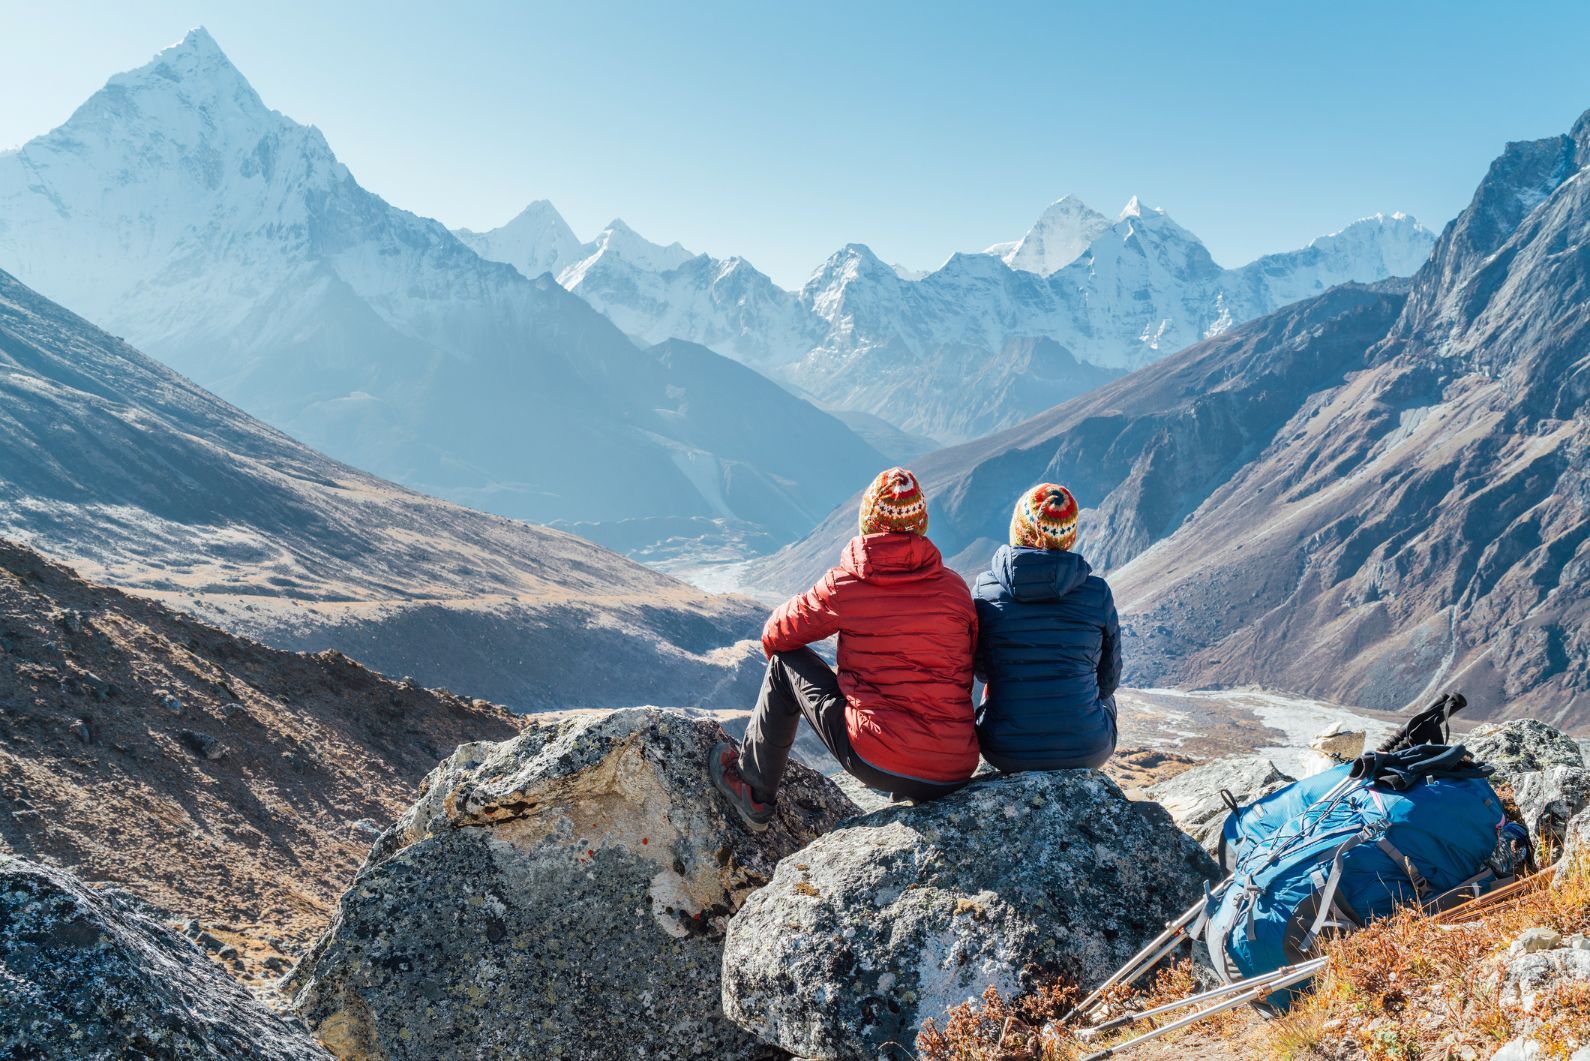 A spot near Dughla, at 4620m, on the Everest Base Camp trail, enjoying valley views to the 6812m Ama Dablam peak. Photo: Getty